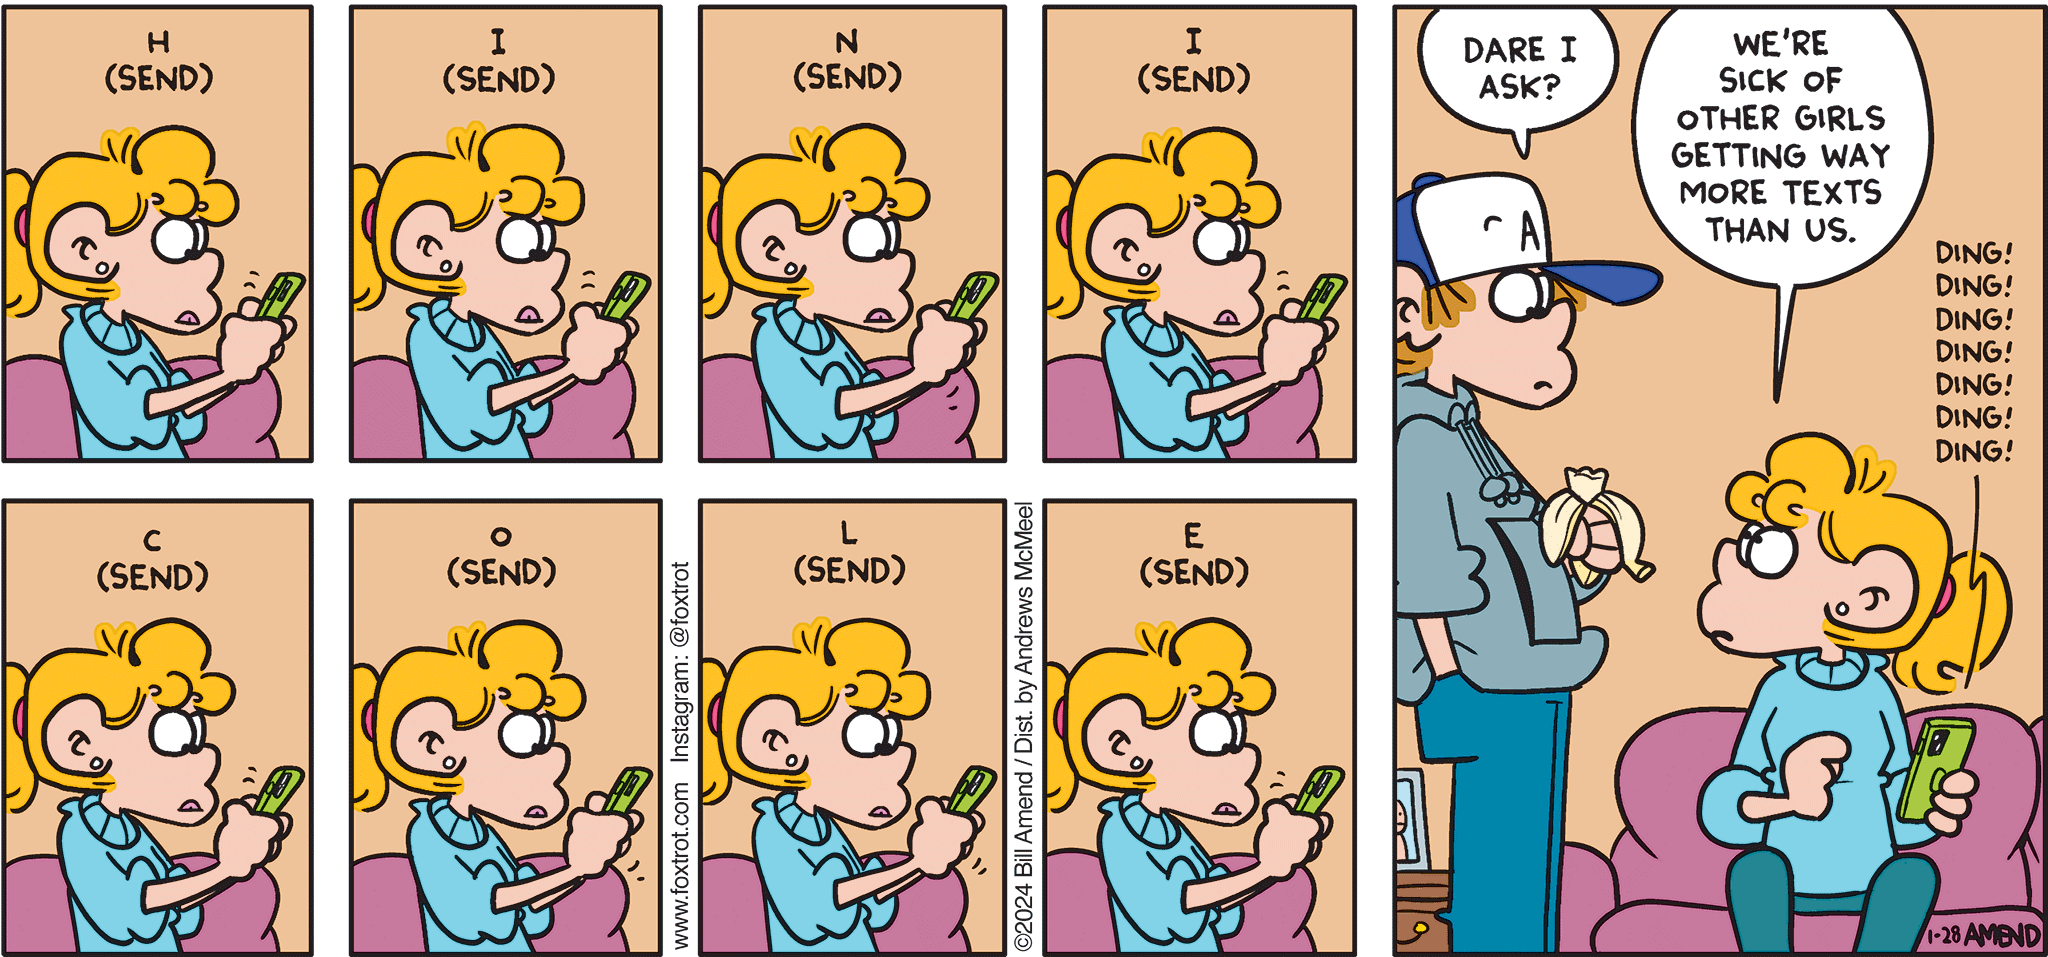 FoxTrot comic strip by Bill Amend - "T-e-x-t-i-n-g" published January 28, 2024 - Transcript: Paige Fox texting: H (send); I (send); N (send); I (send); C (send); O (send); L (send); E (send). Peter Fox: Dare I ask? Paige Fox: We're sick of other girls getting way more texts than us. [Paige's phone: DING! DING! DING! DING! DING! DING!]